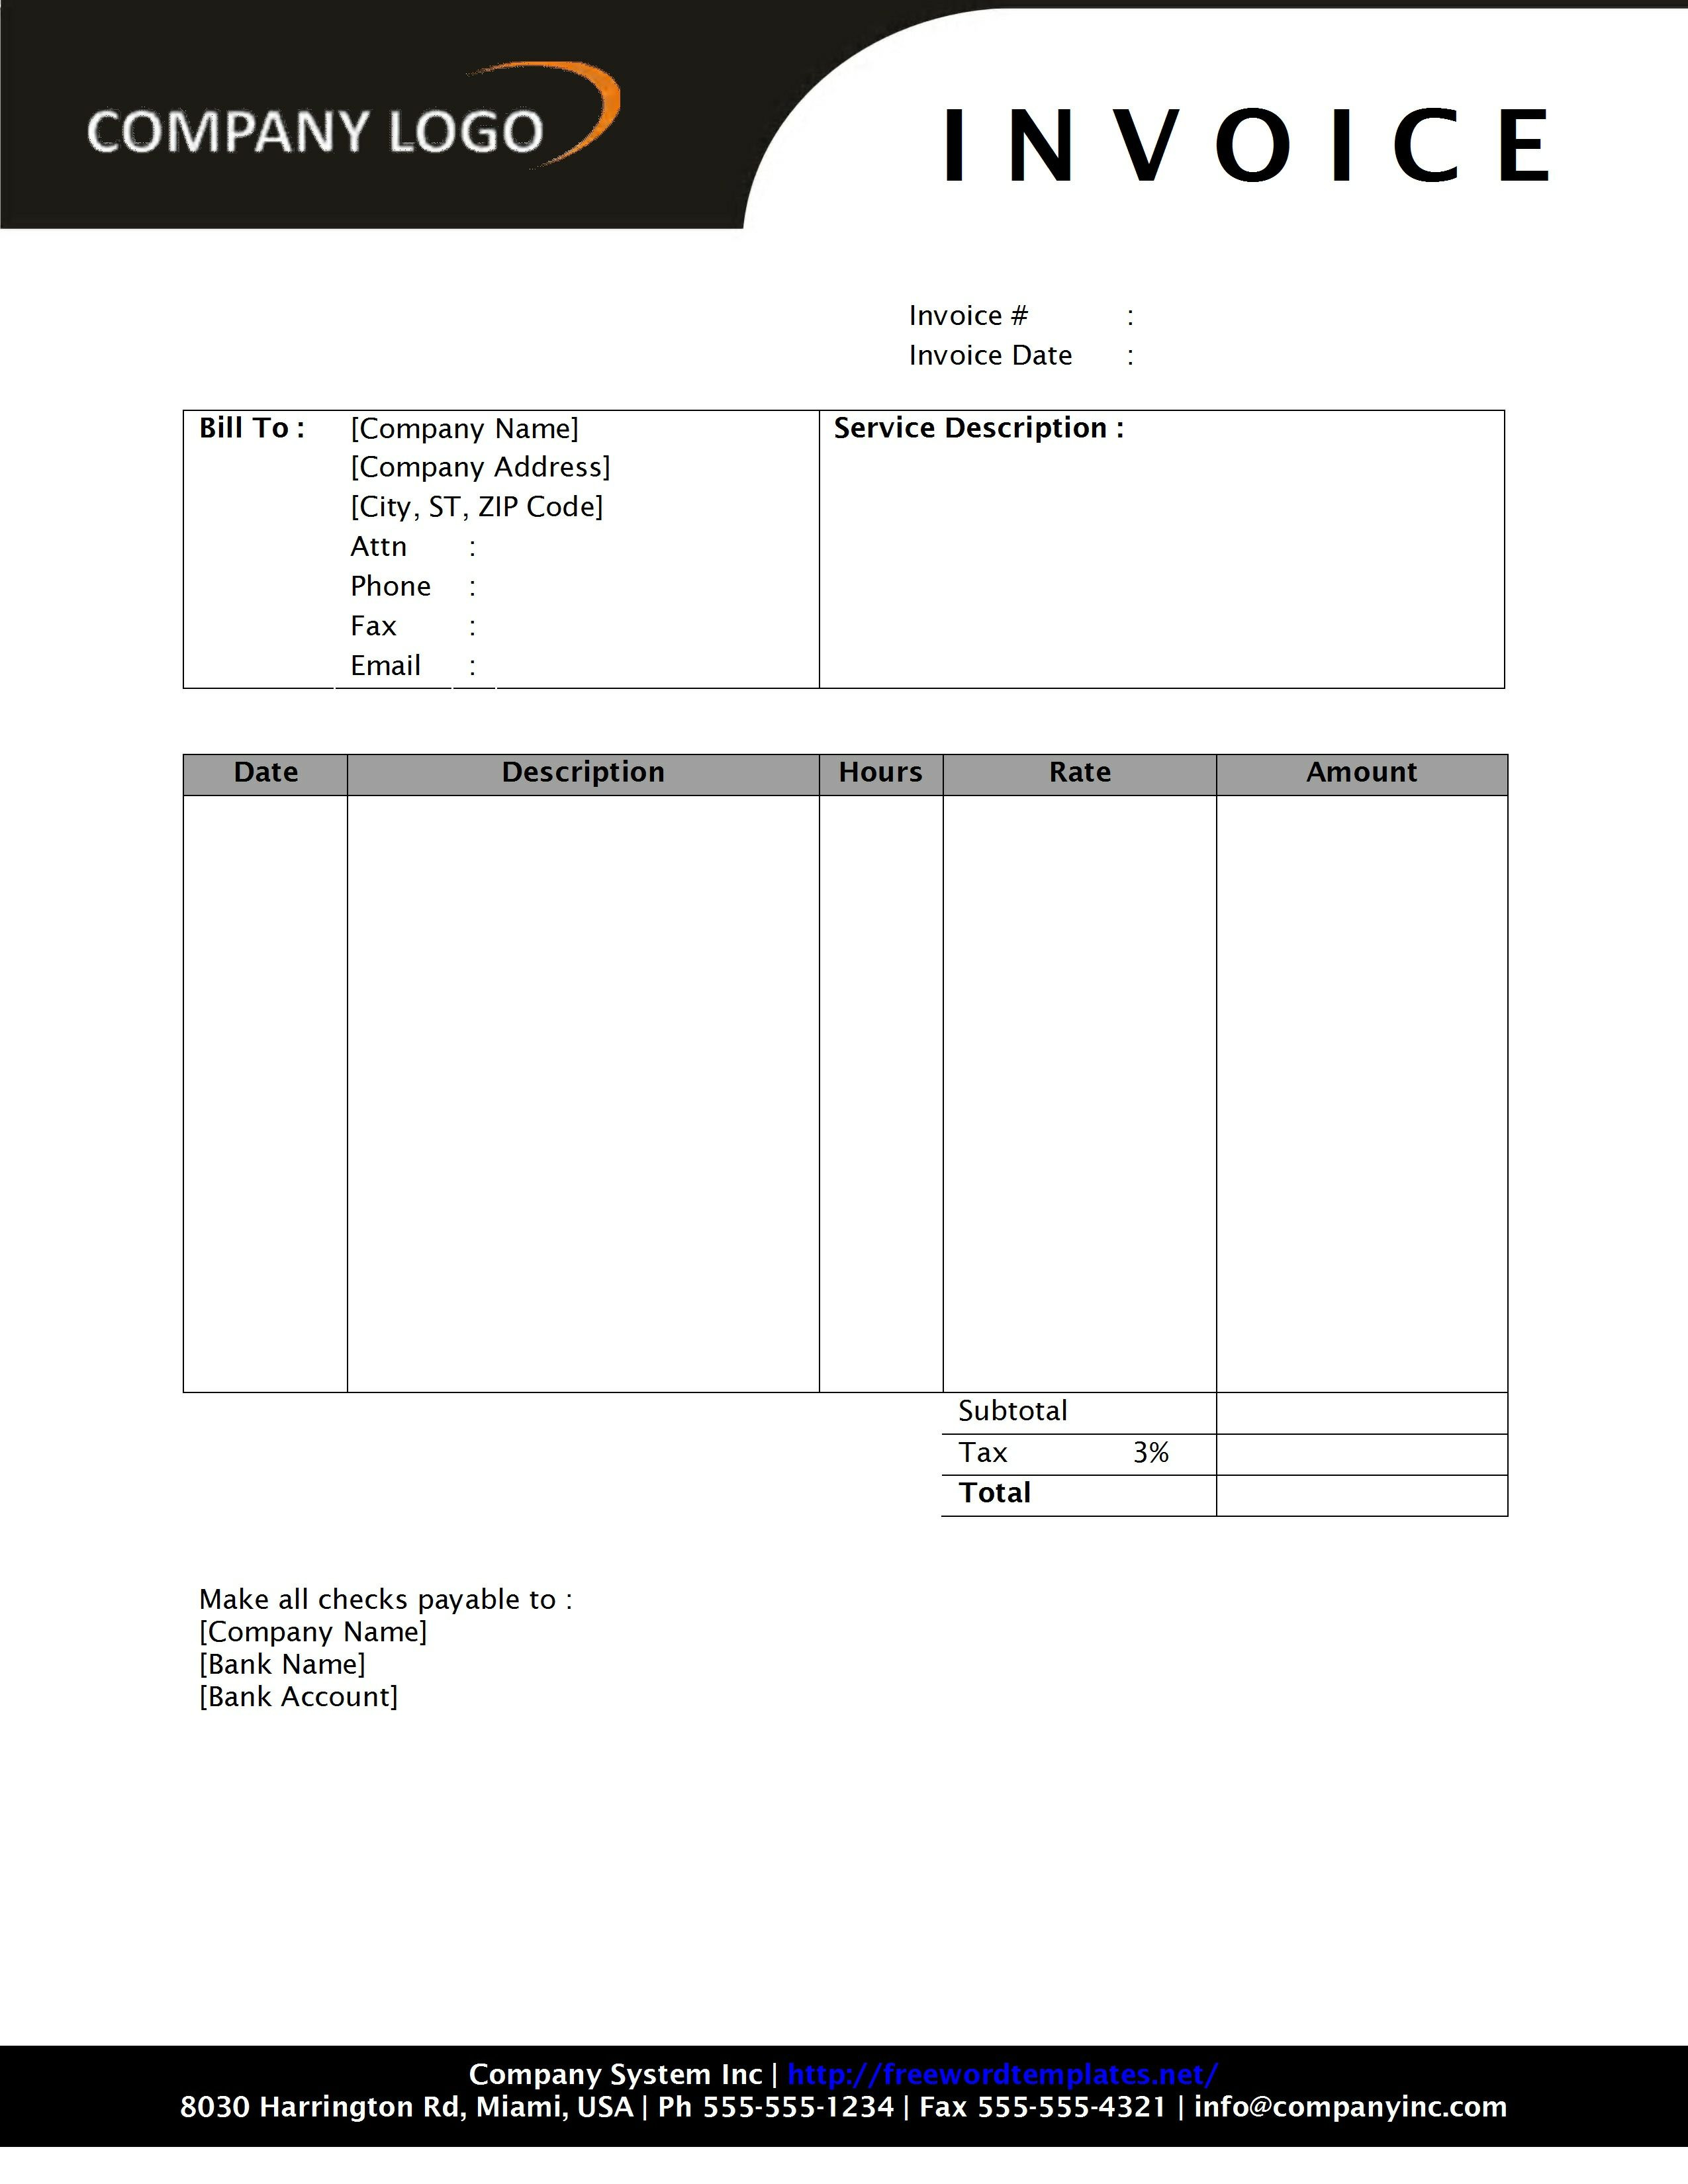 Free Resume Samples & Writing Guides for All: 23/23/23 Within Invoice Template Word 2010